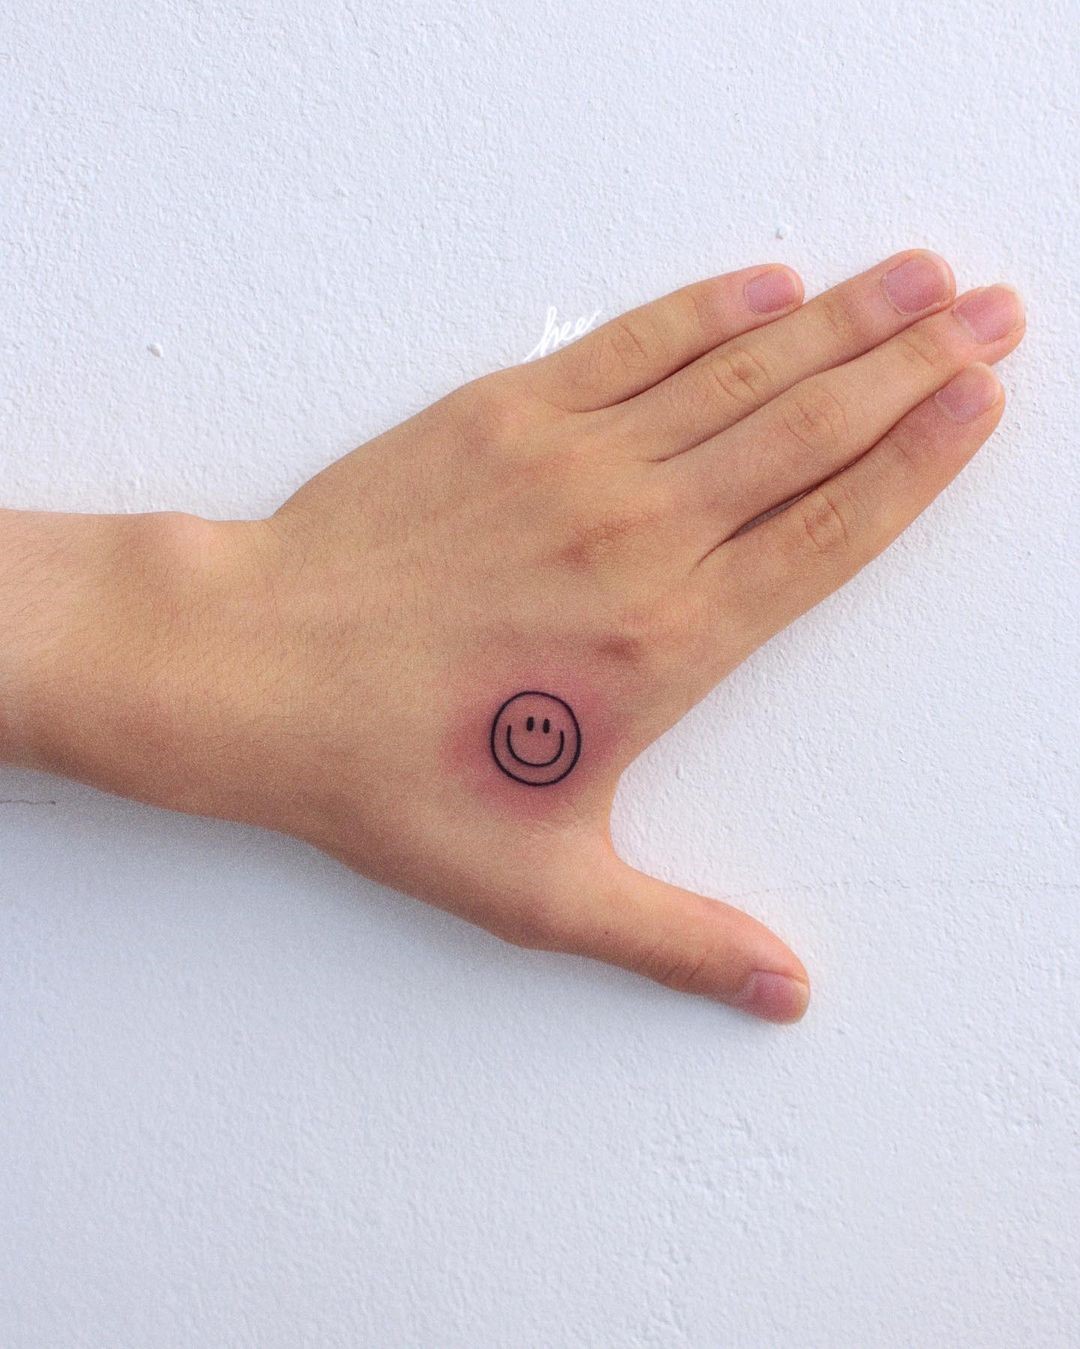 Smiley Face Tattoo On Hand